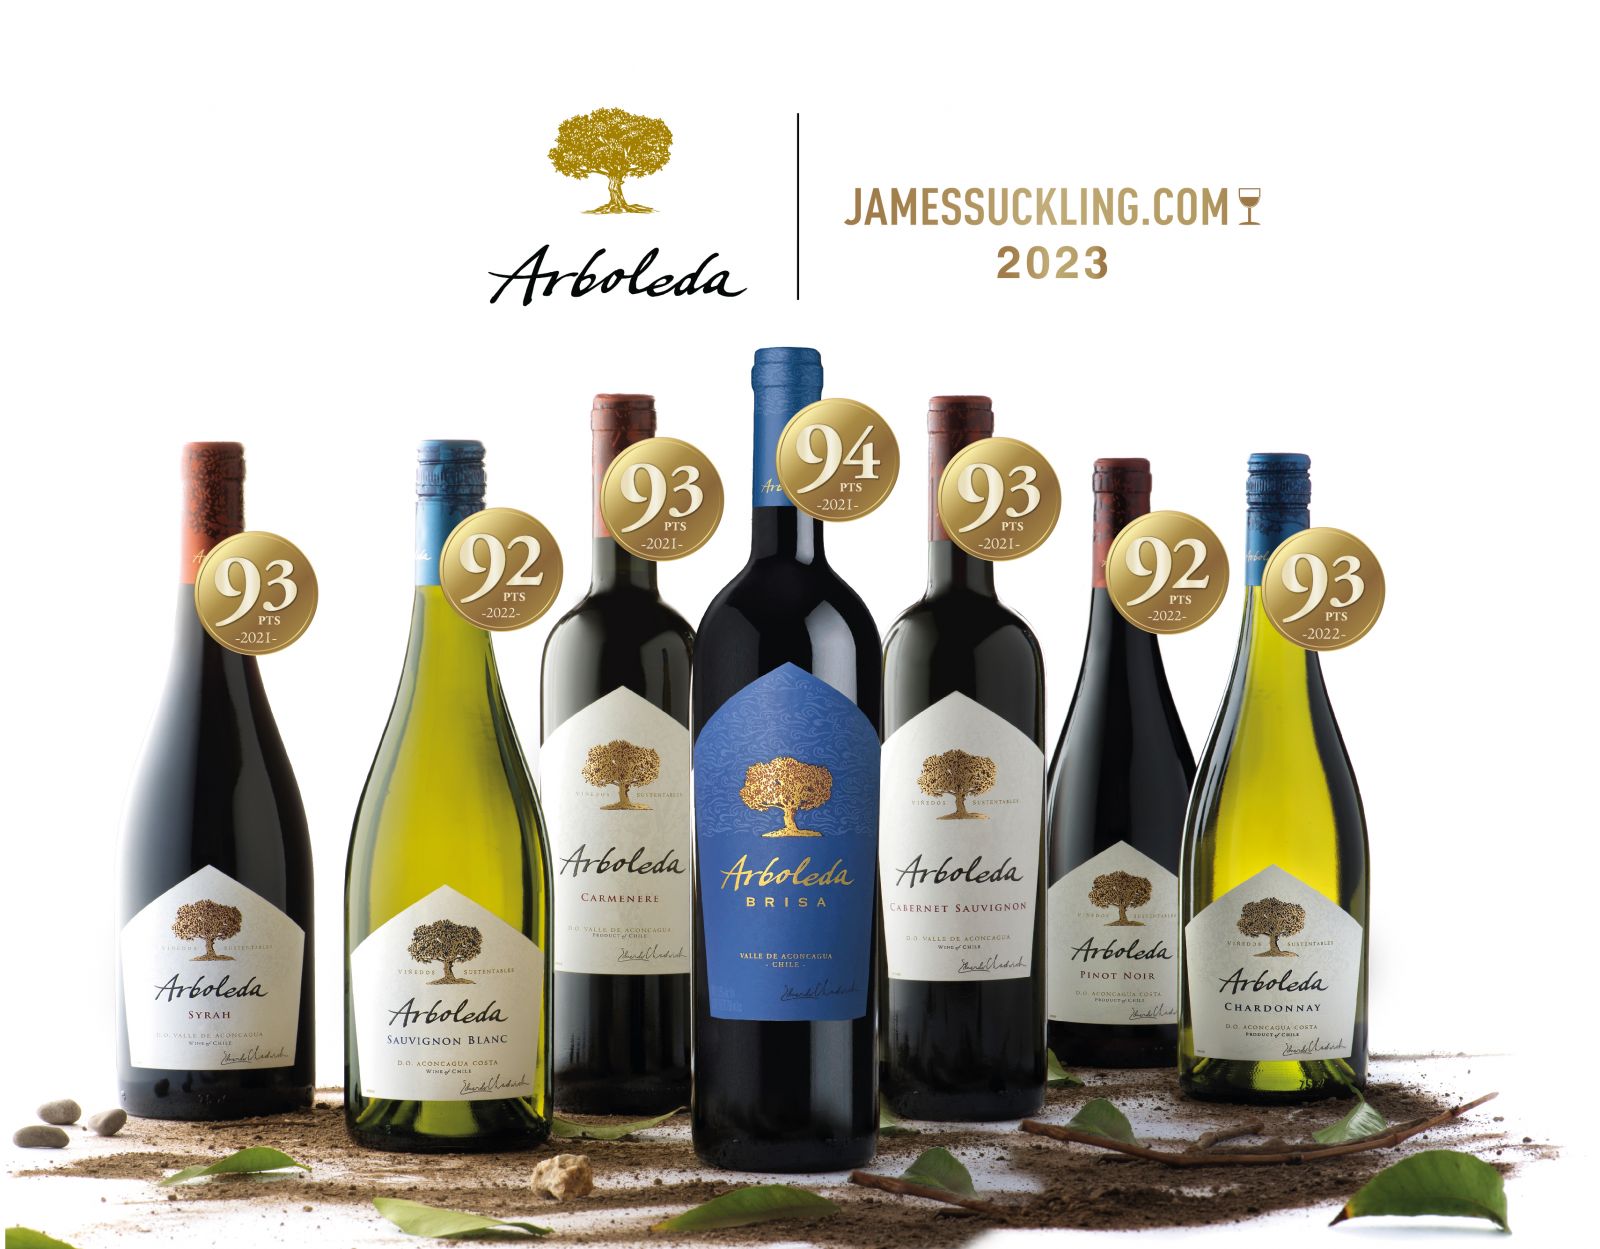 We are happy to announce our Arboleda scores recently reported by famous wine critic - James Suckling, 7/7 above 92 points!